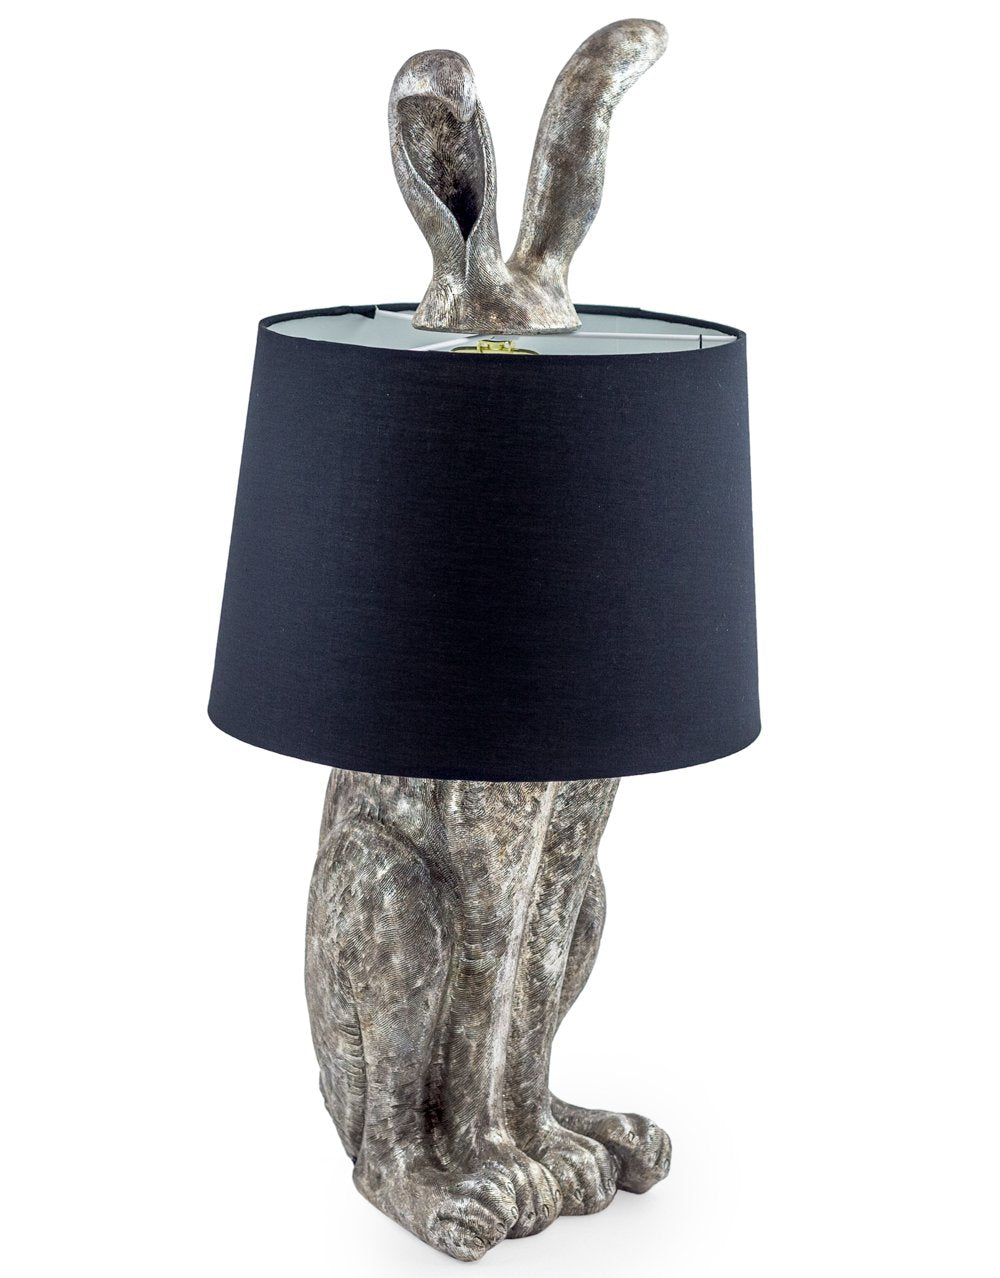 ANTIQUED SILVER RABBIT LAMP WITH BLACK SHADE